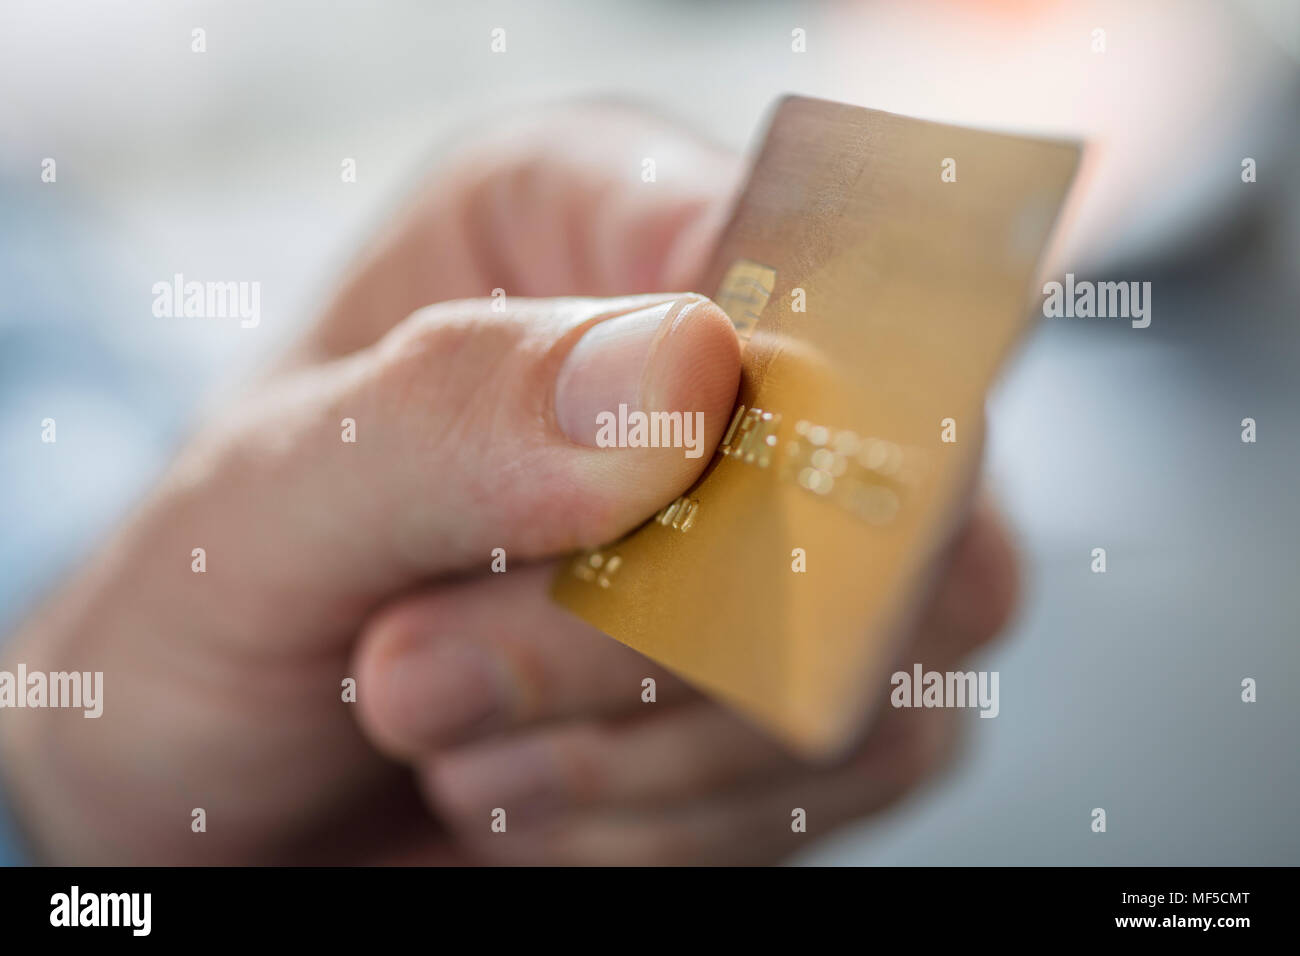 Man's hand holding credit card, close-up Stock Photo